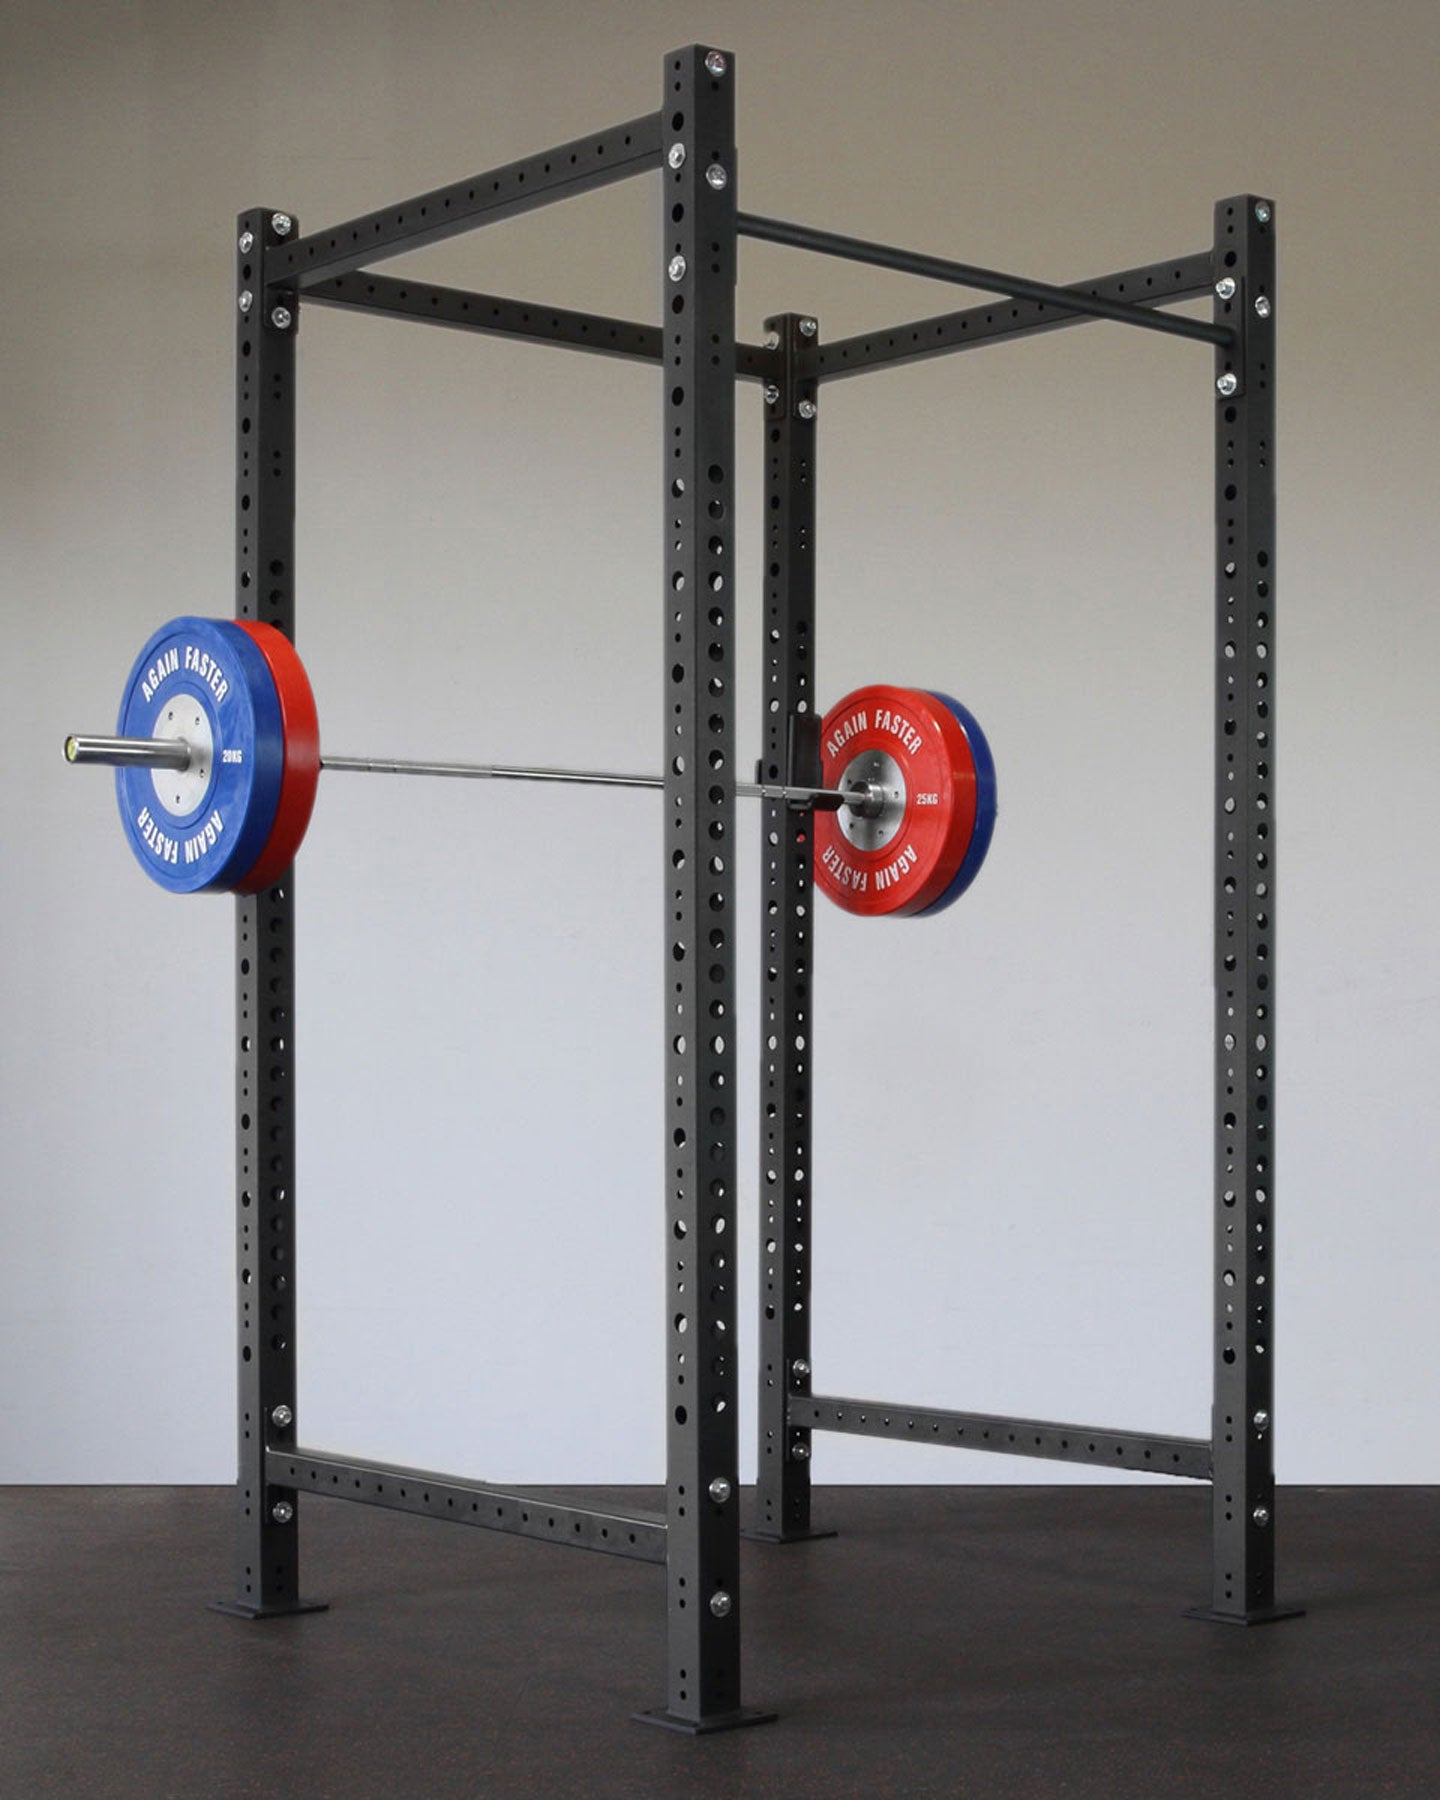 4x4 power rack with olympic barbell and color bumper plates